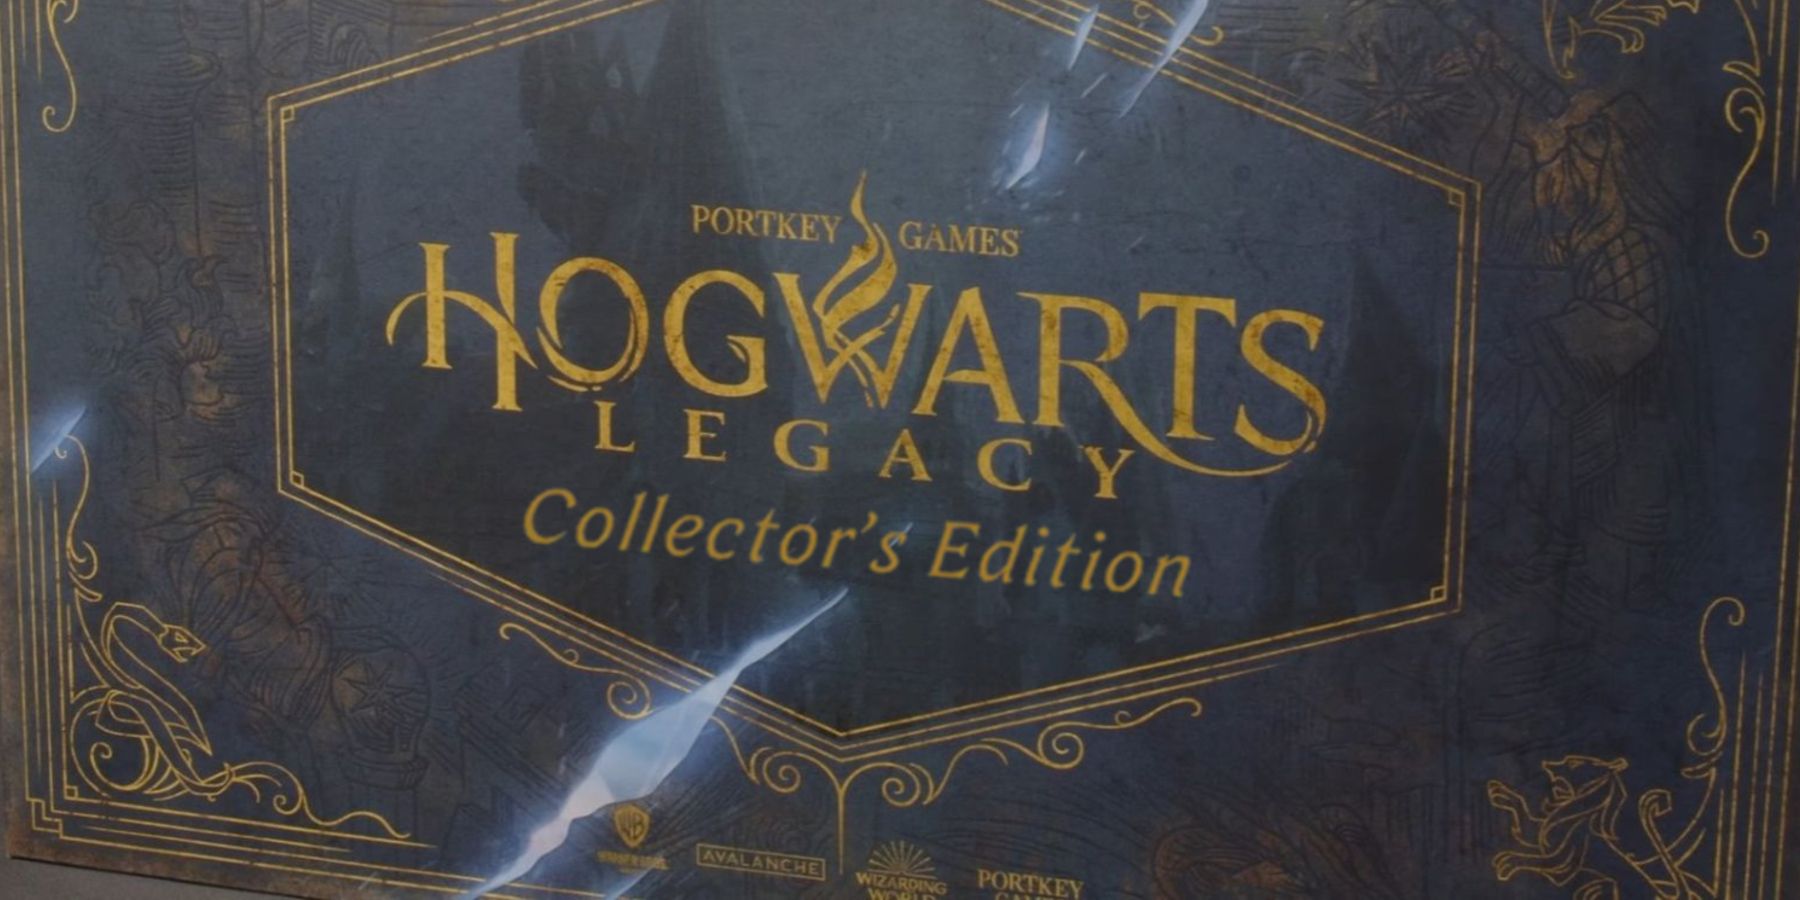 Harry Potter, Hogwarts Legacy - Collector's Edition